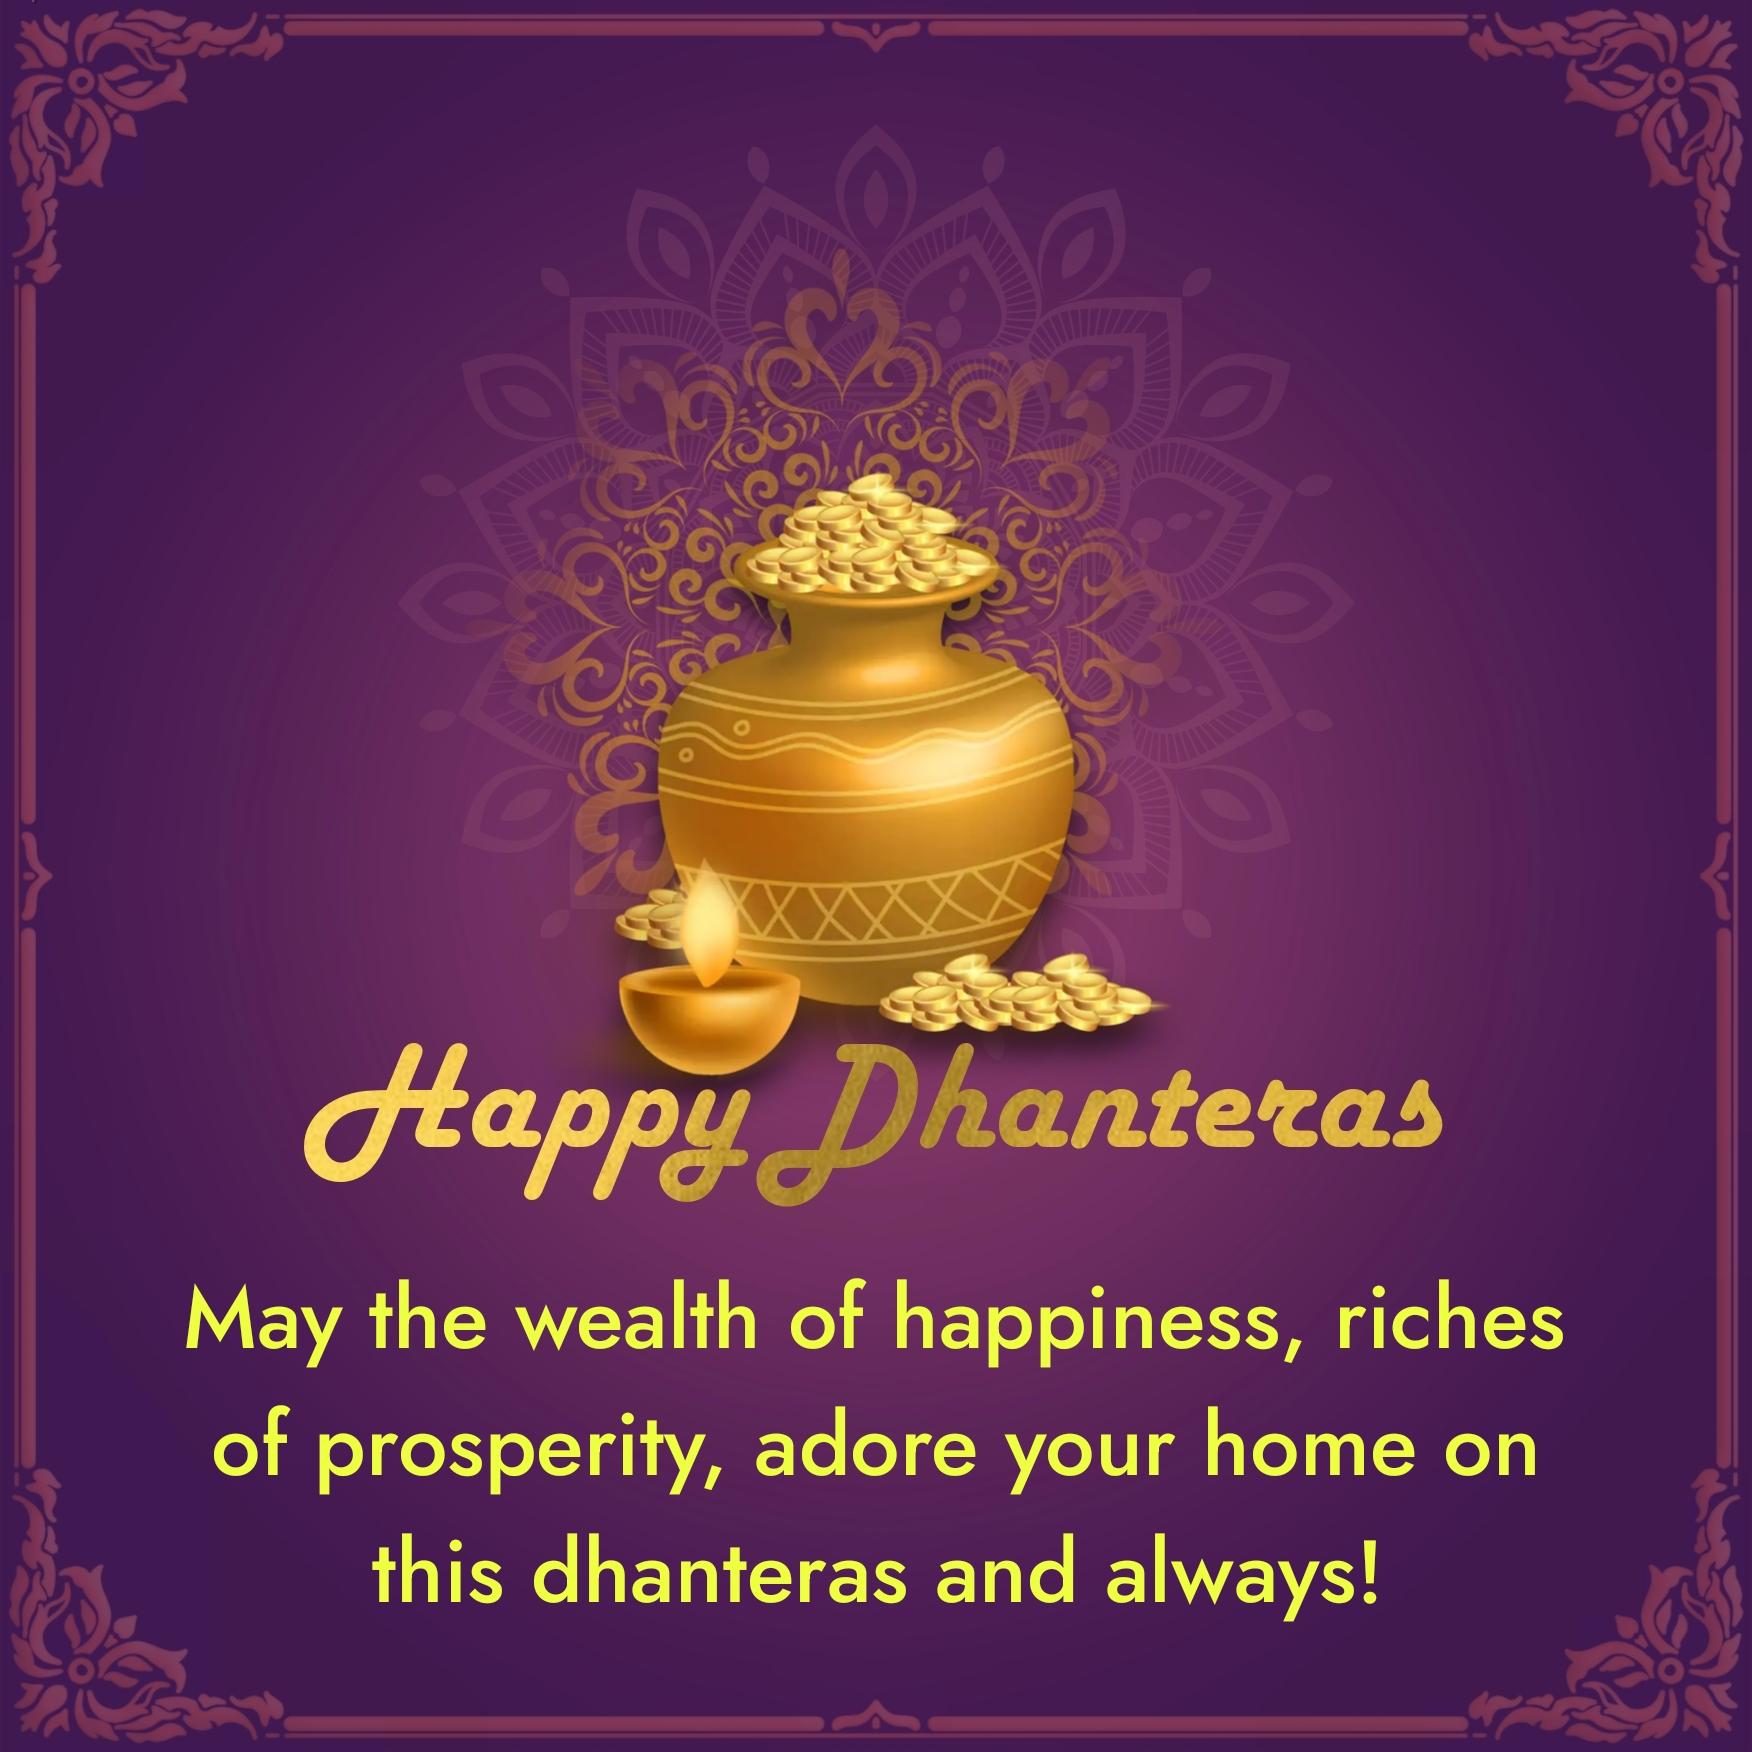 May the wealth of happiness riches of prosperity